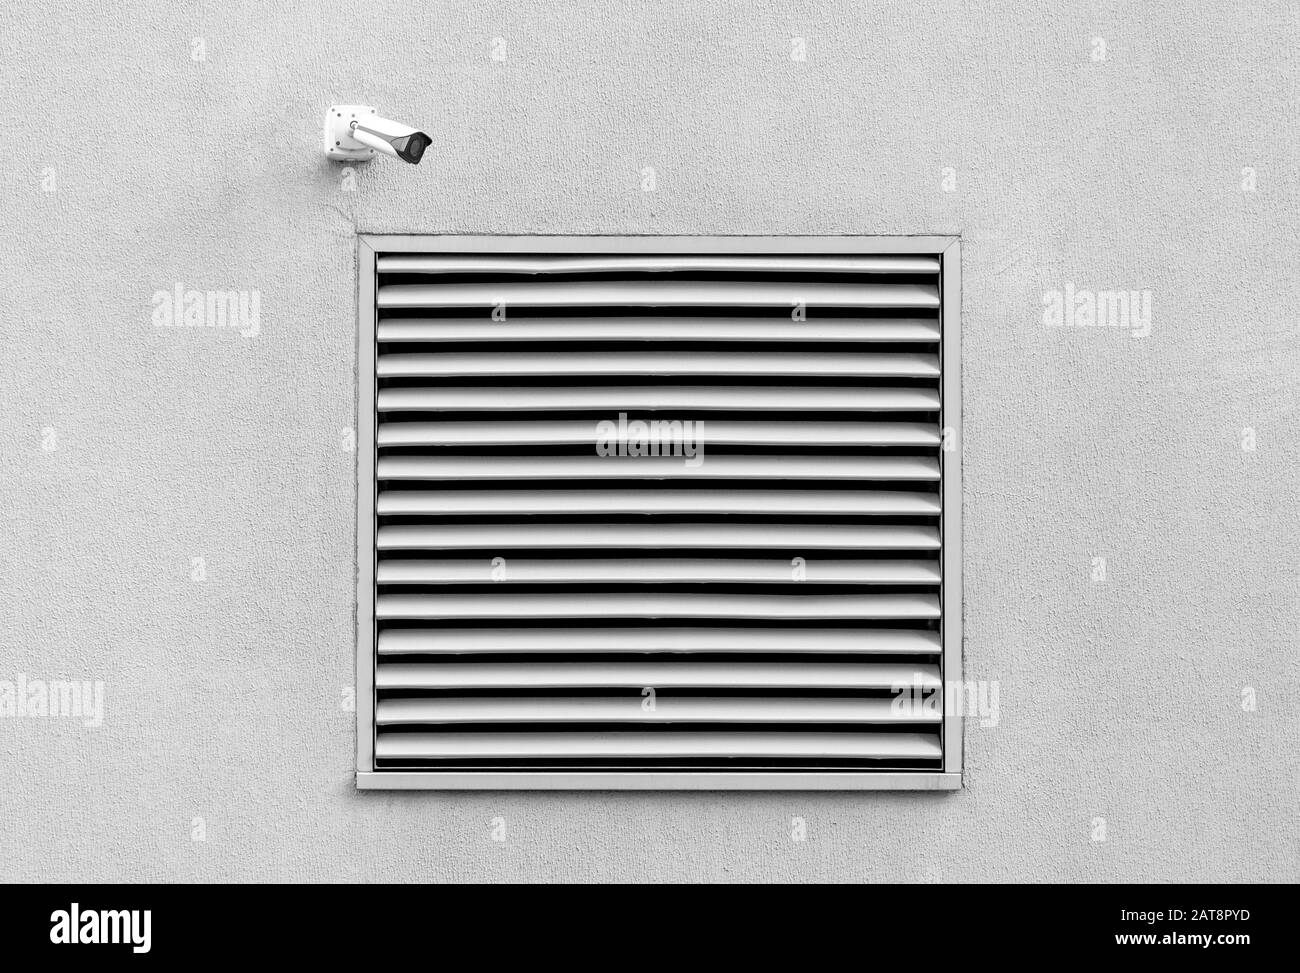 Industrial architecture detail, concrete wall and basement window with security camera, front view black and white picture Stock Photo